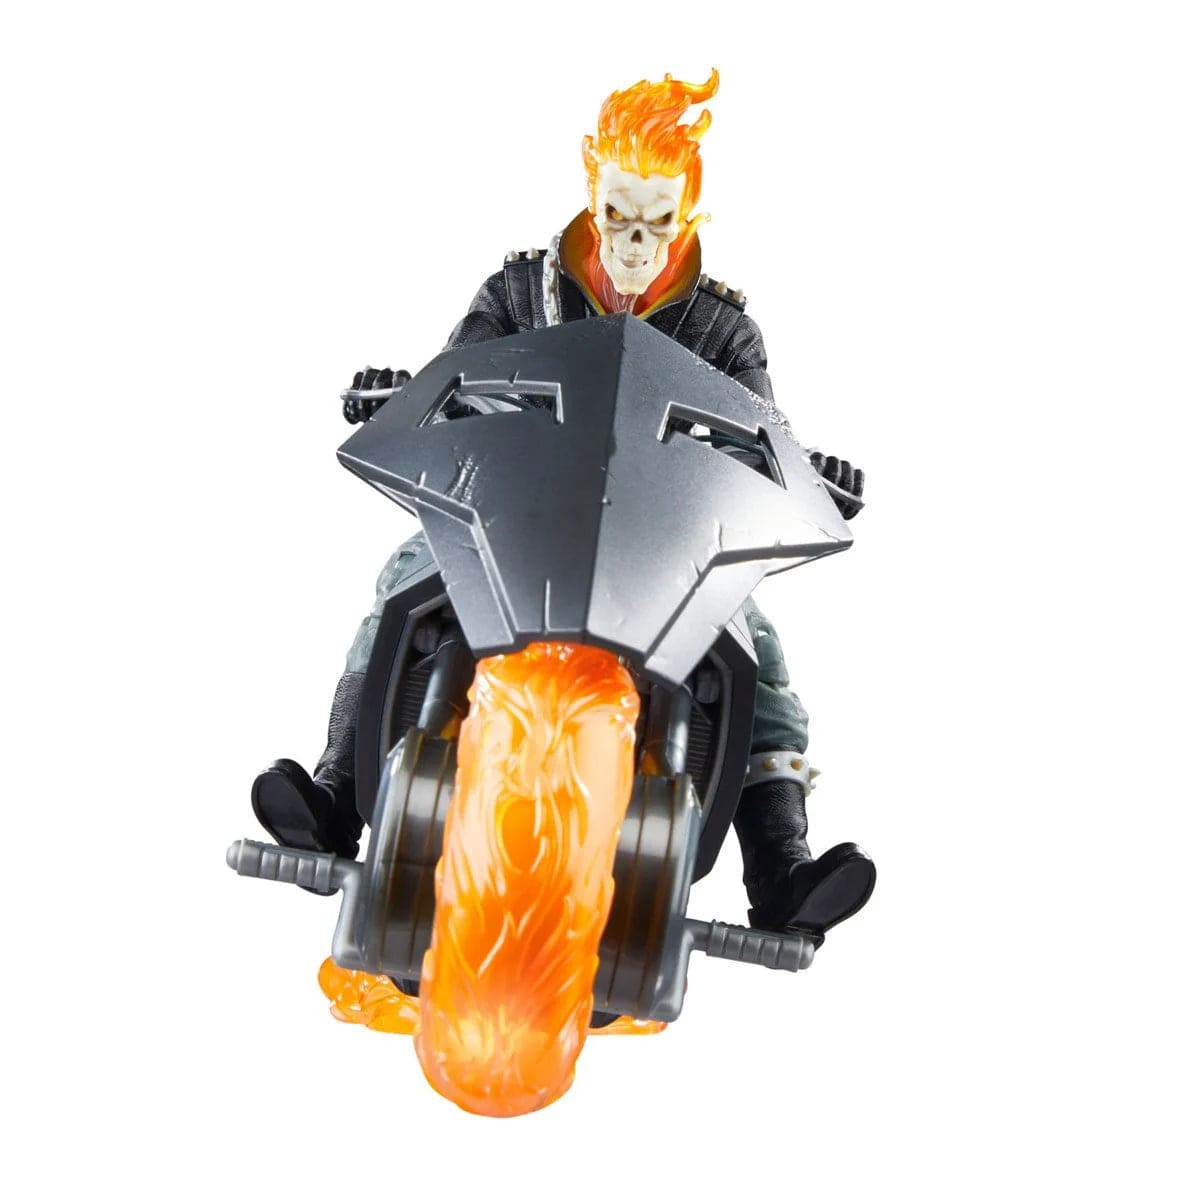 Marvel-Legends-Series-Ghost-Rider-_Danny-Ketch_-with-Motorcycle-Action-Figure-Drive-Forward-Bike